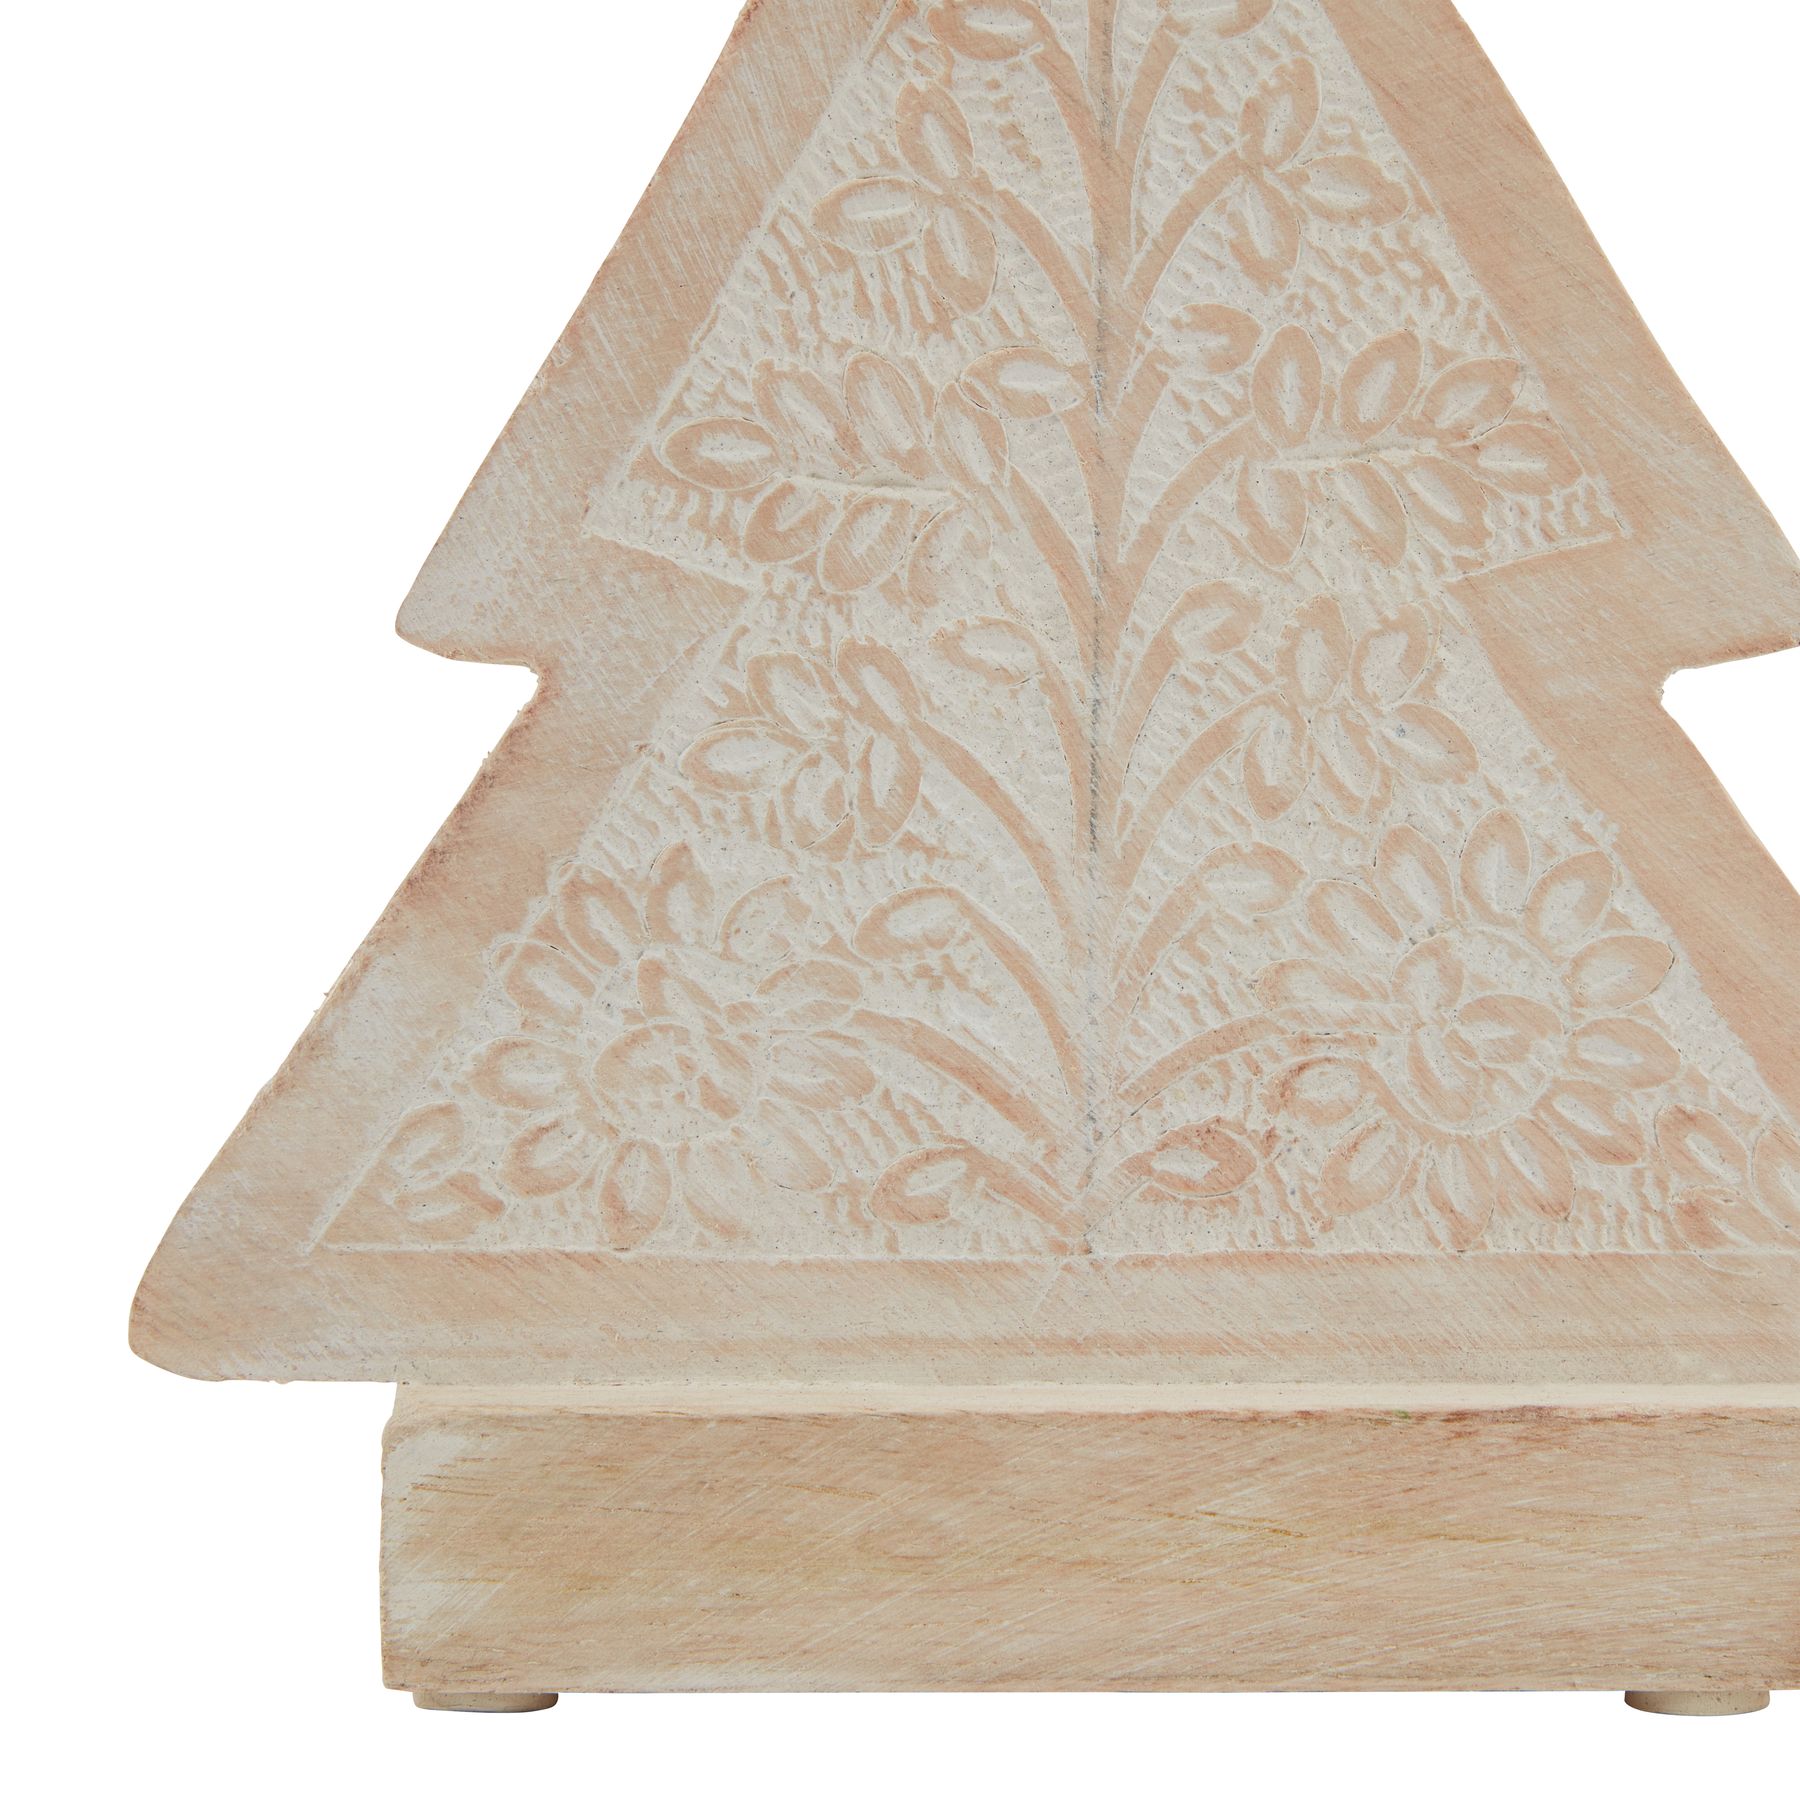 White Wash Collection Wooden Patterned Decorative Tree - Image 2